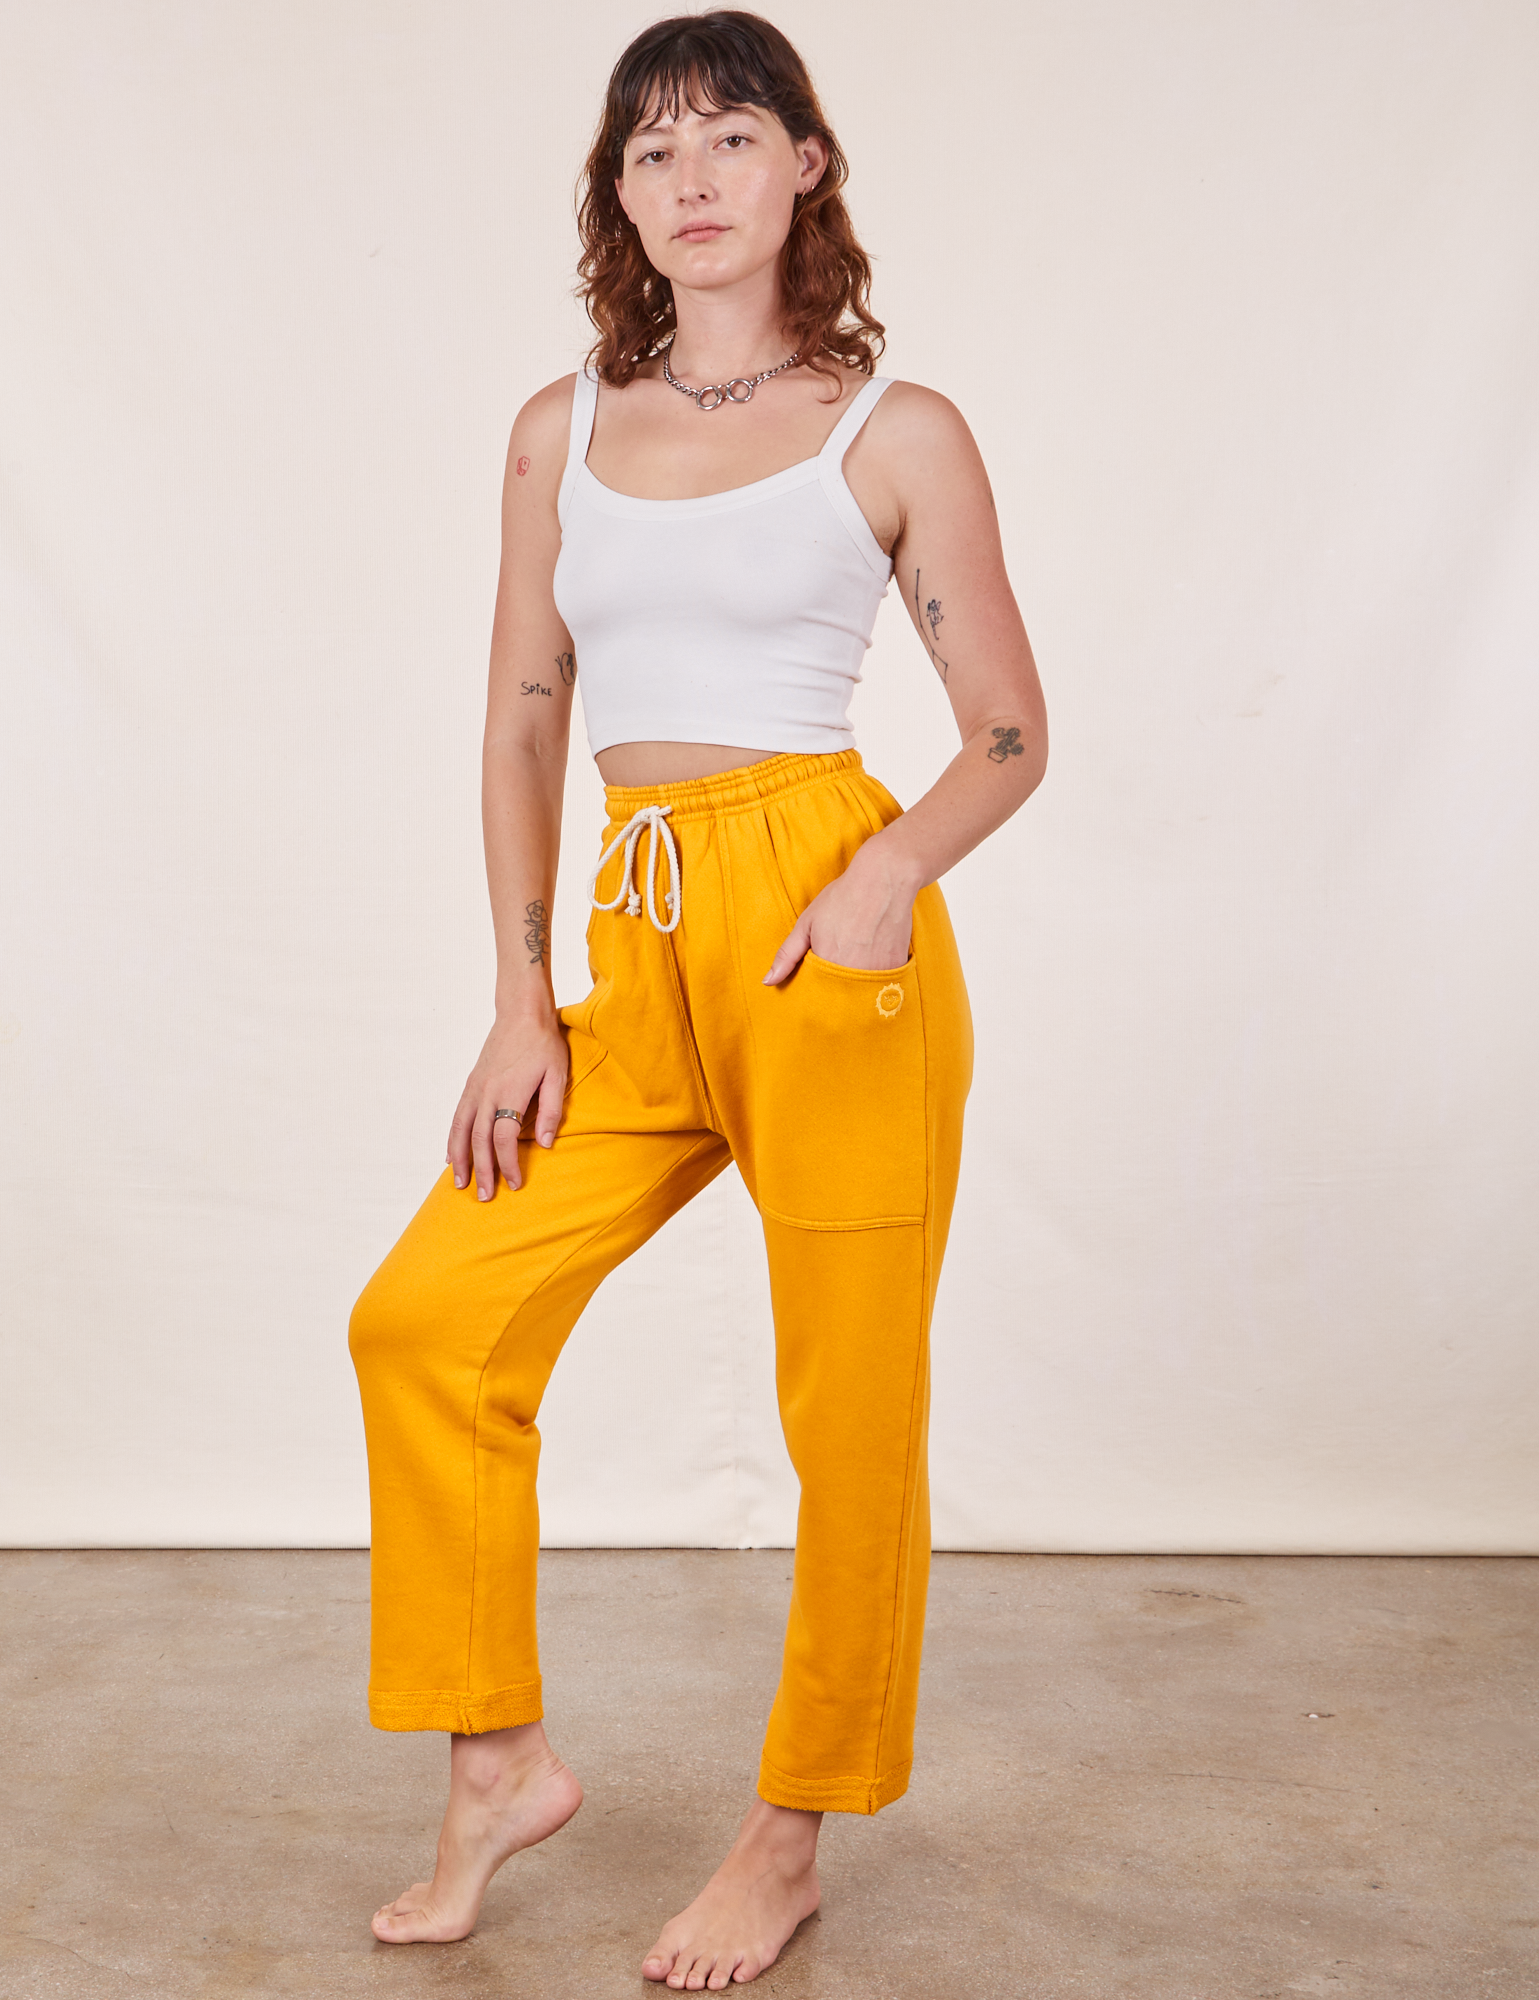 Alex is wearing Cropped Rolled Cuff Sweatpants in Mustard Yellow and vintage off-white Cami